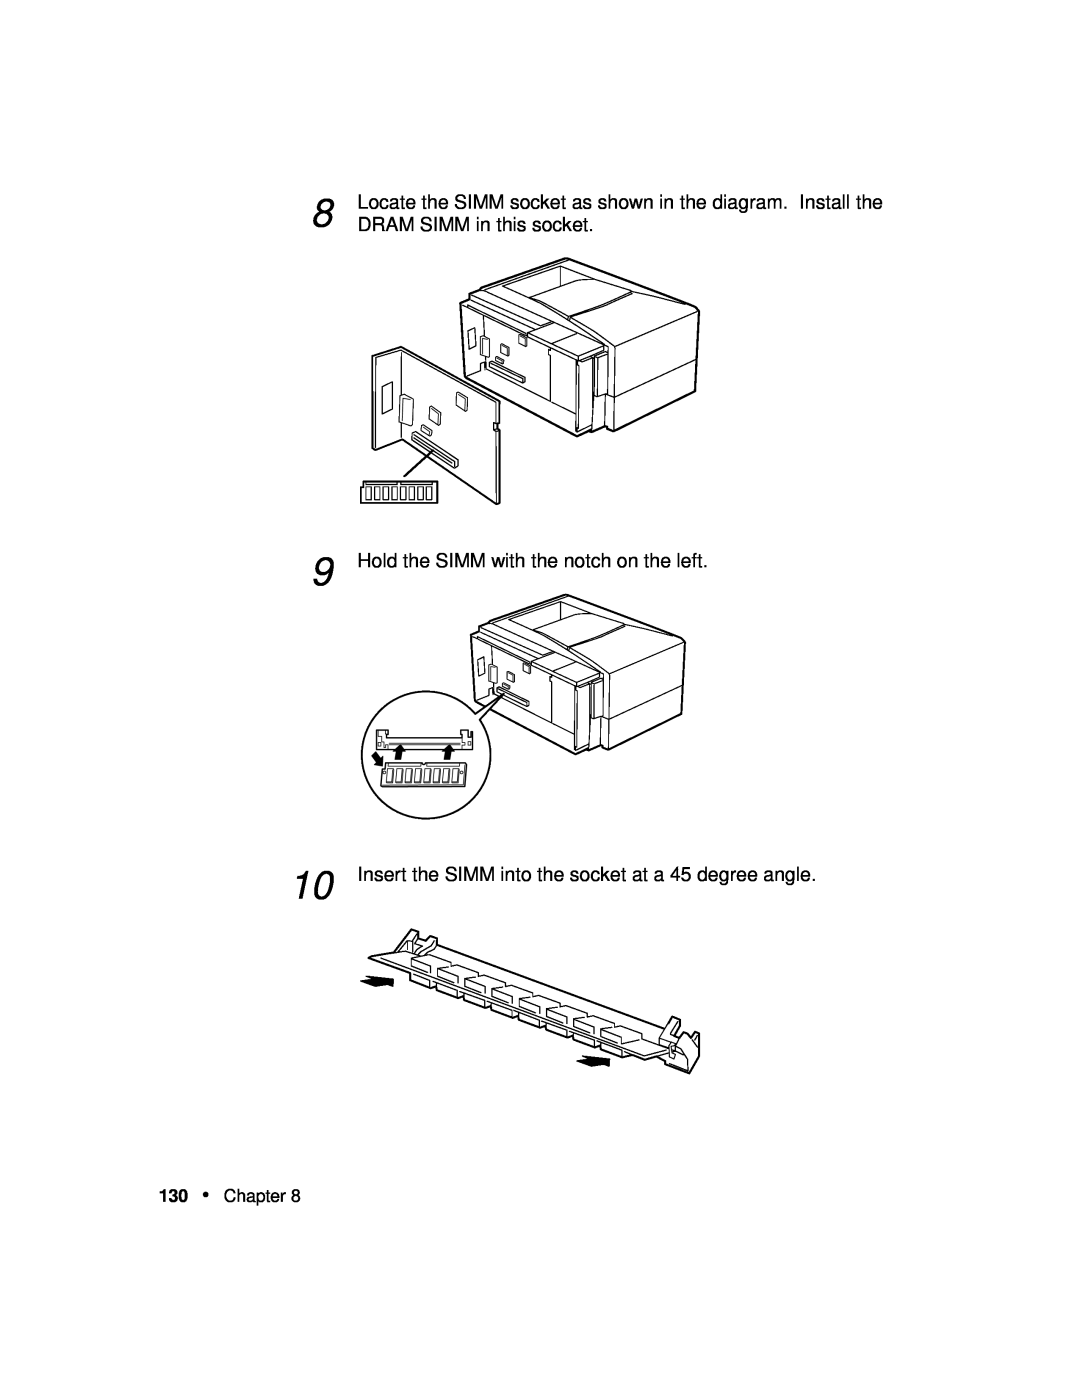 Xerox P12 manual Locate the SIMM socket as shown in the diagram. Install the, DRAM SIMM in this socket, Chapter 